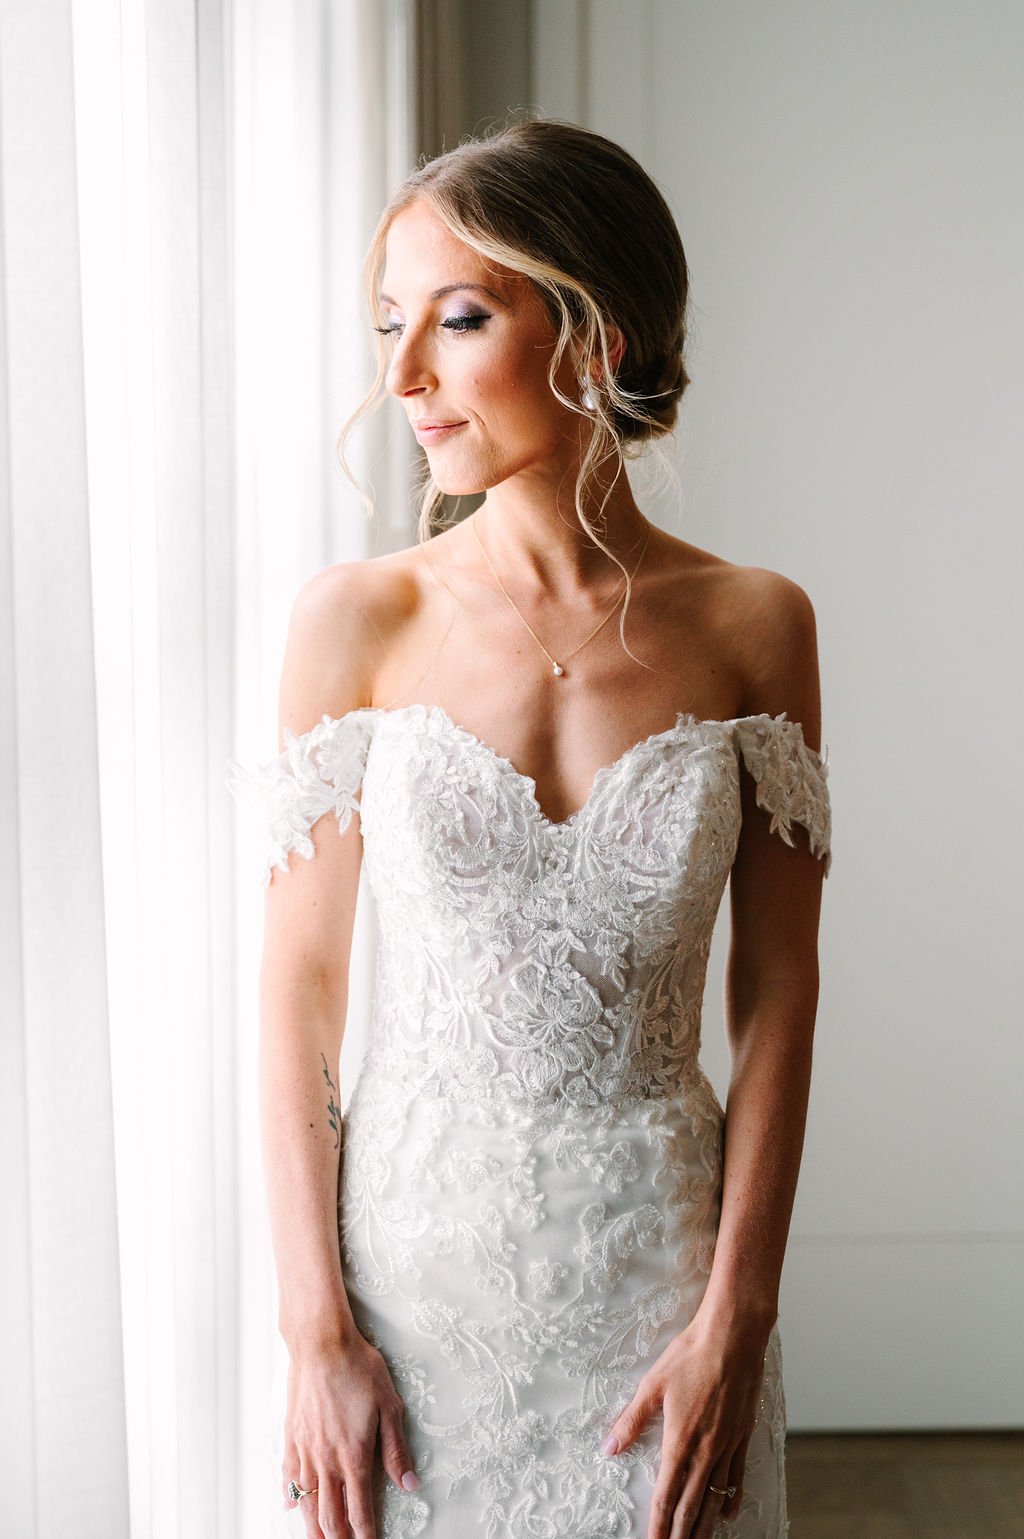 ivory-and-beau-bride-hayley-in-katell-by-maggie-sottero-a-clasic-fitted-lace-wedding-dress-with-sweetheart-neckline-purchased-from-savannah-bridal-shop-ivory-and-beau-2.jpg